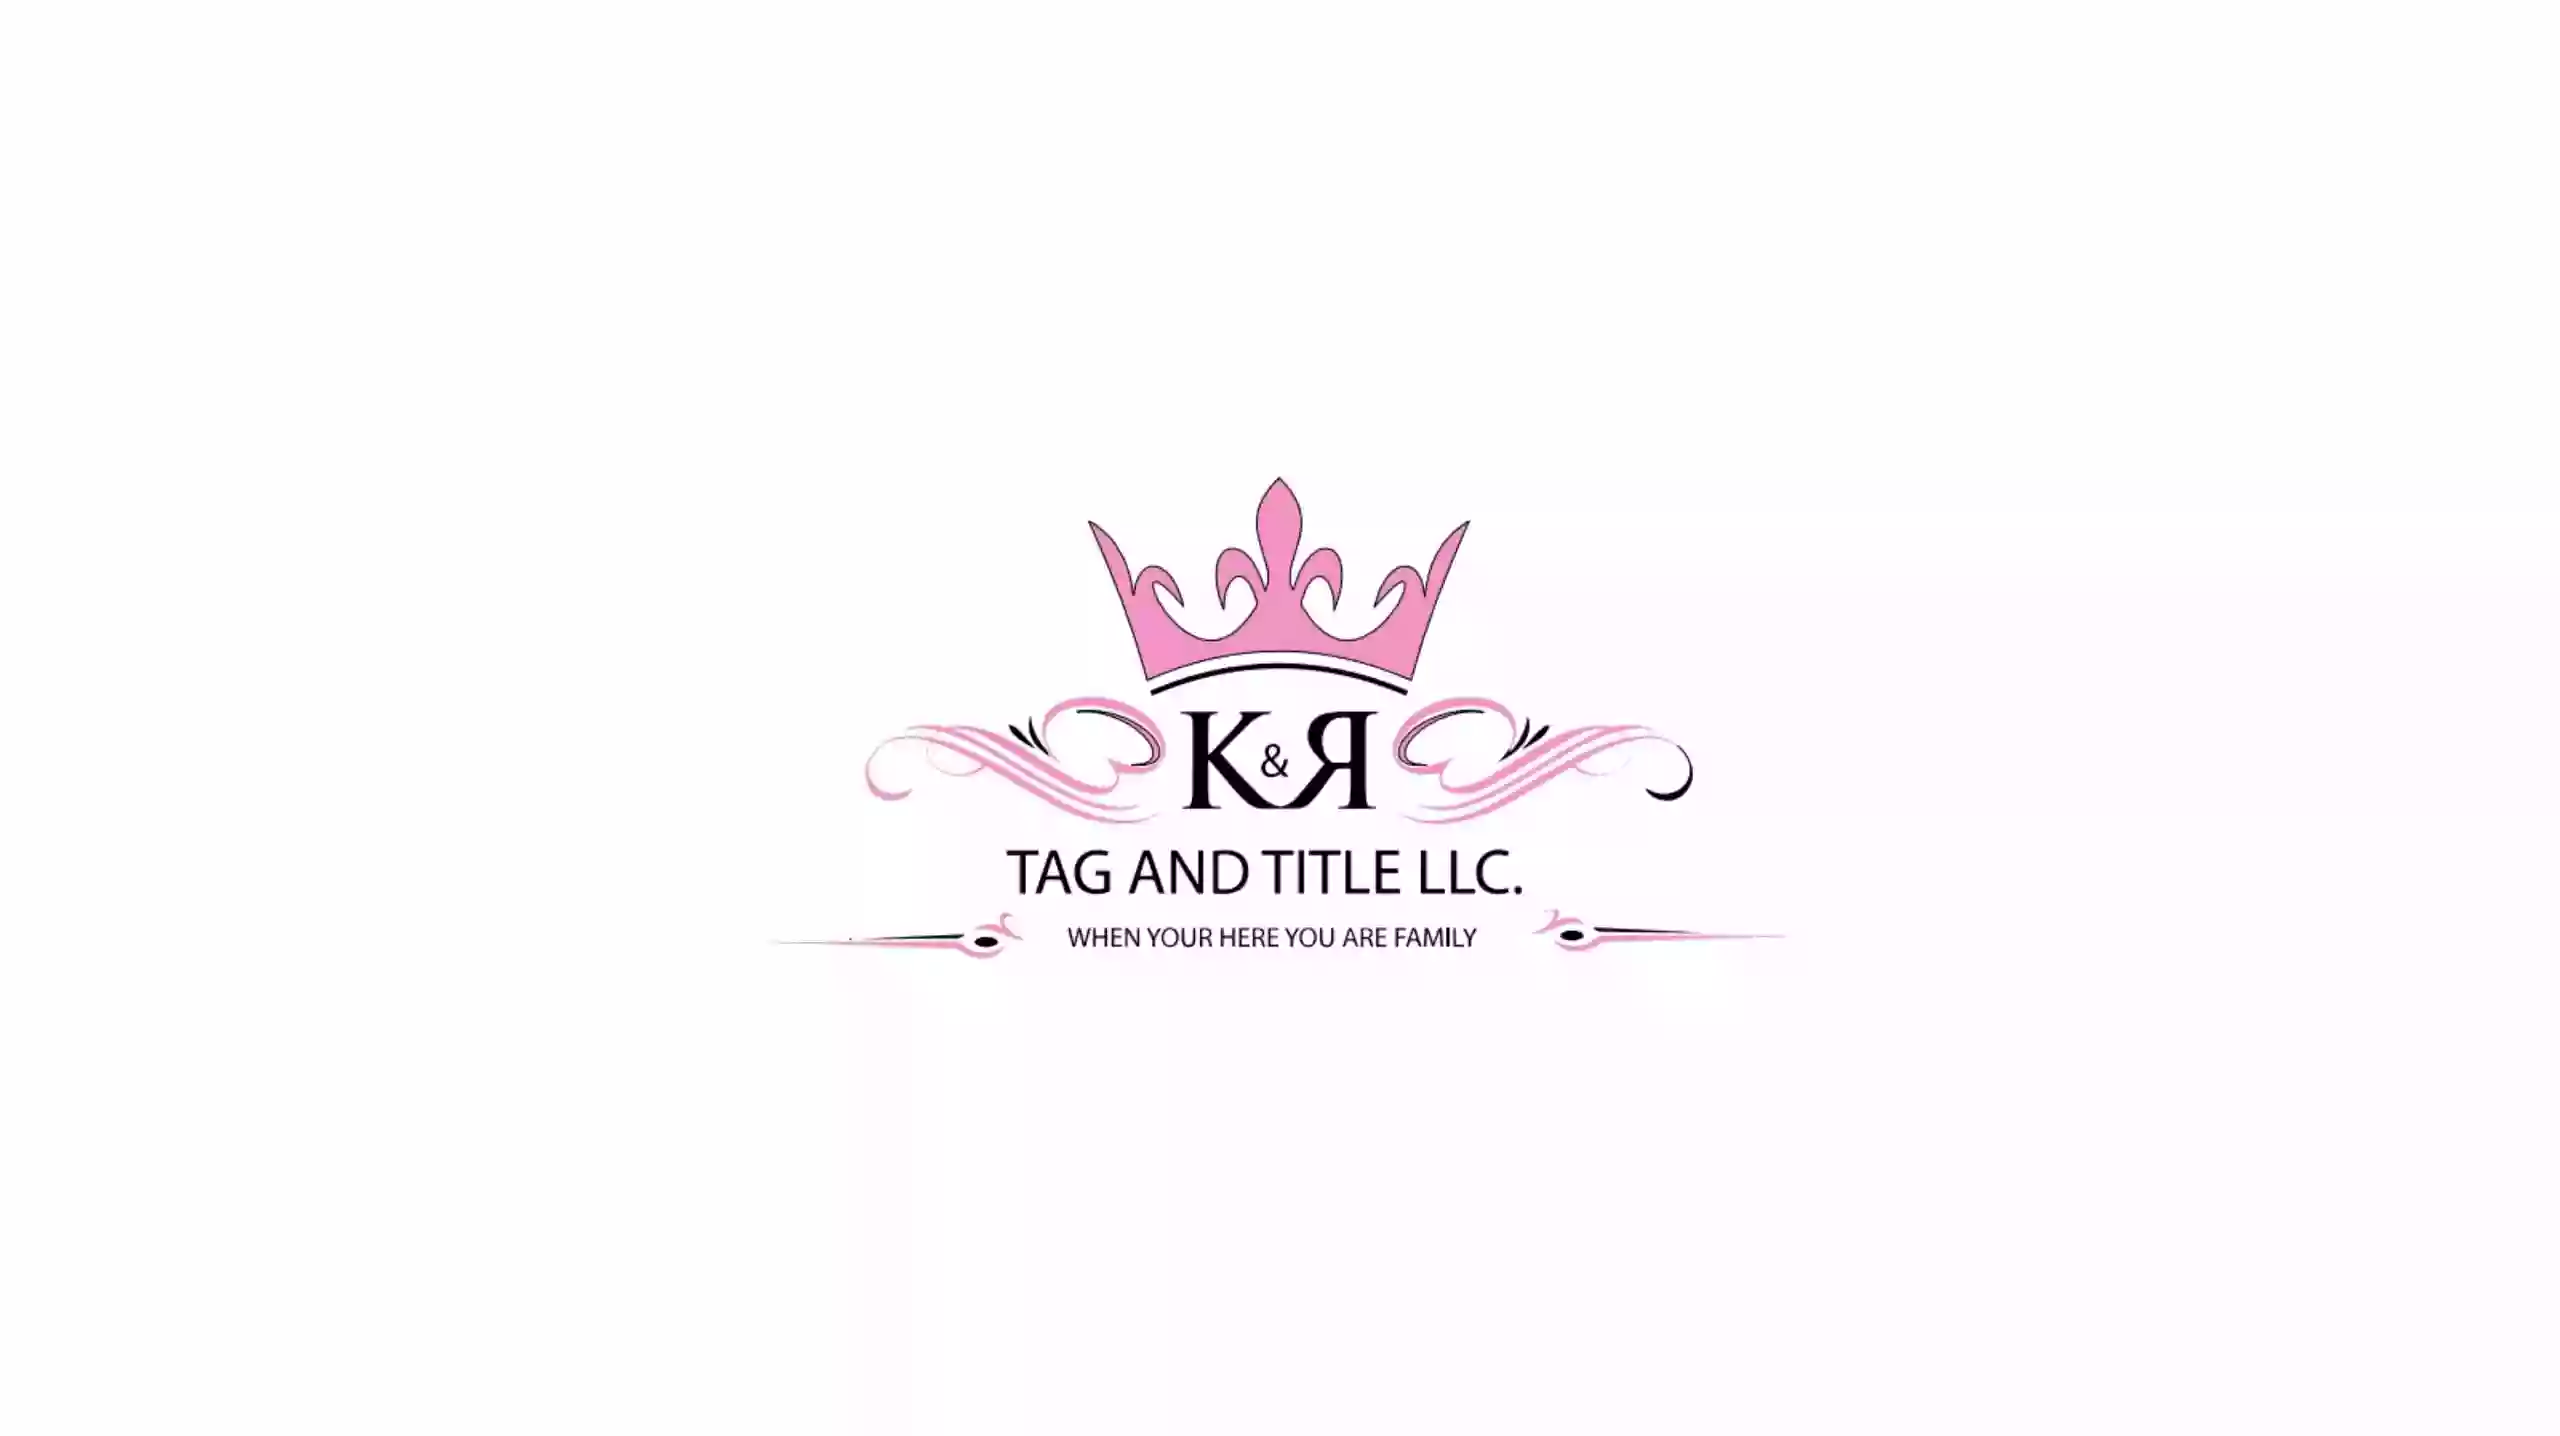 K & R TAG AND TITLE